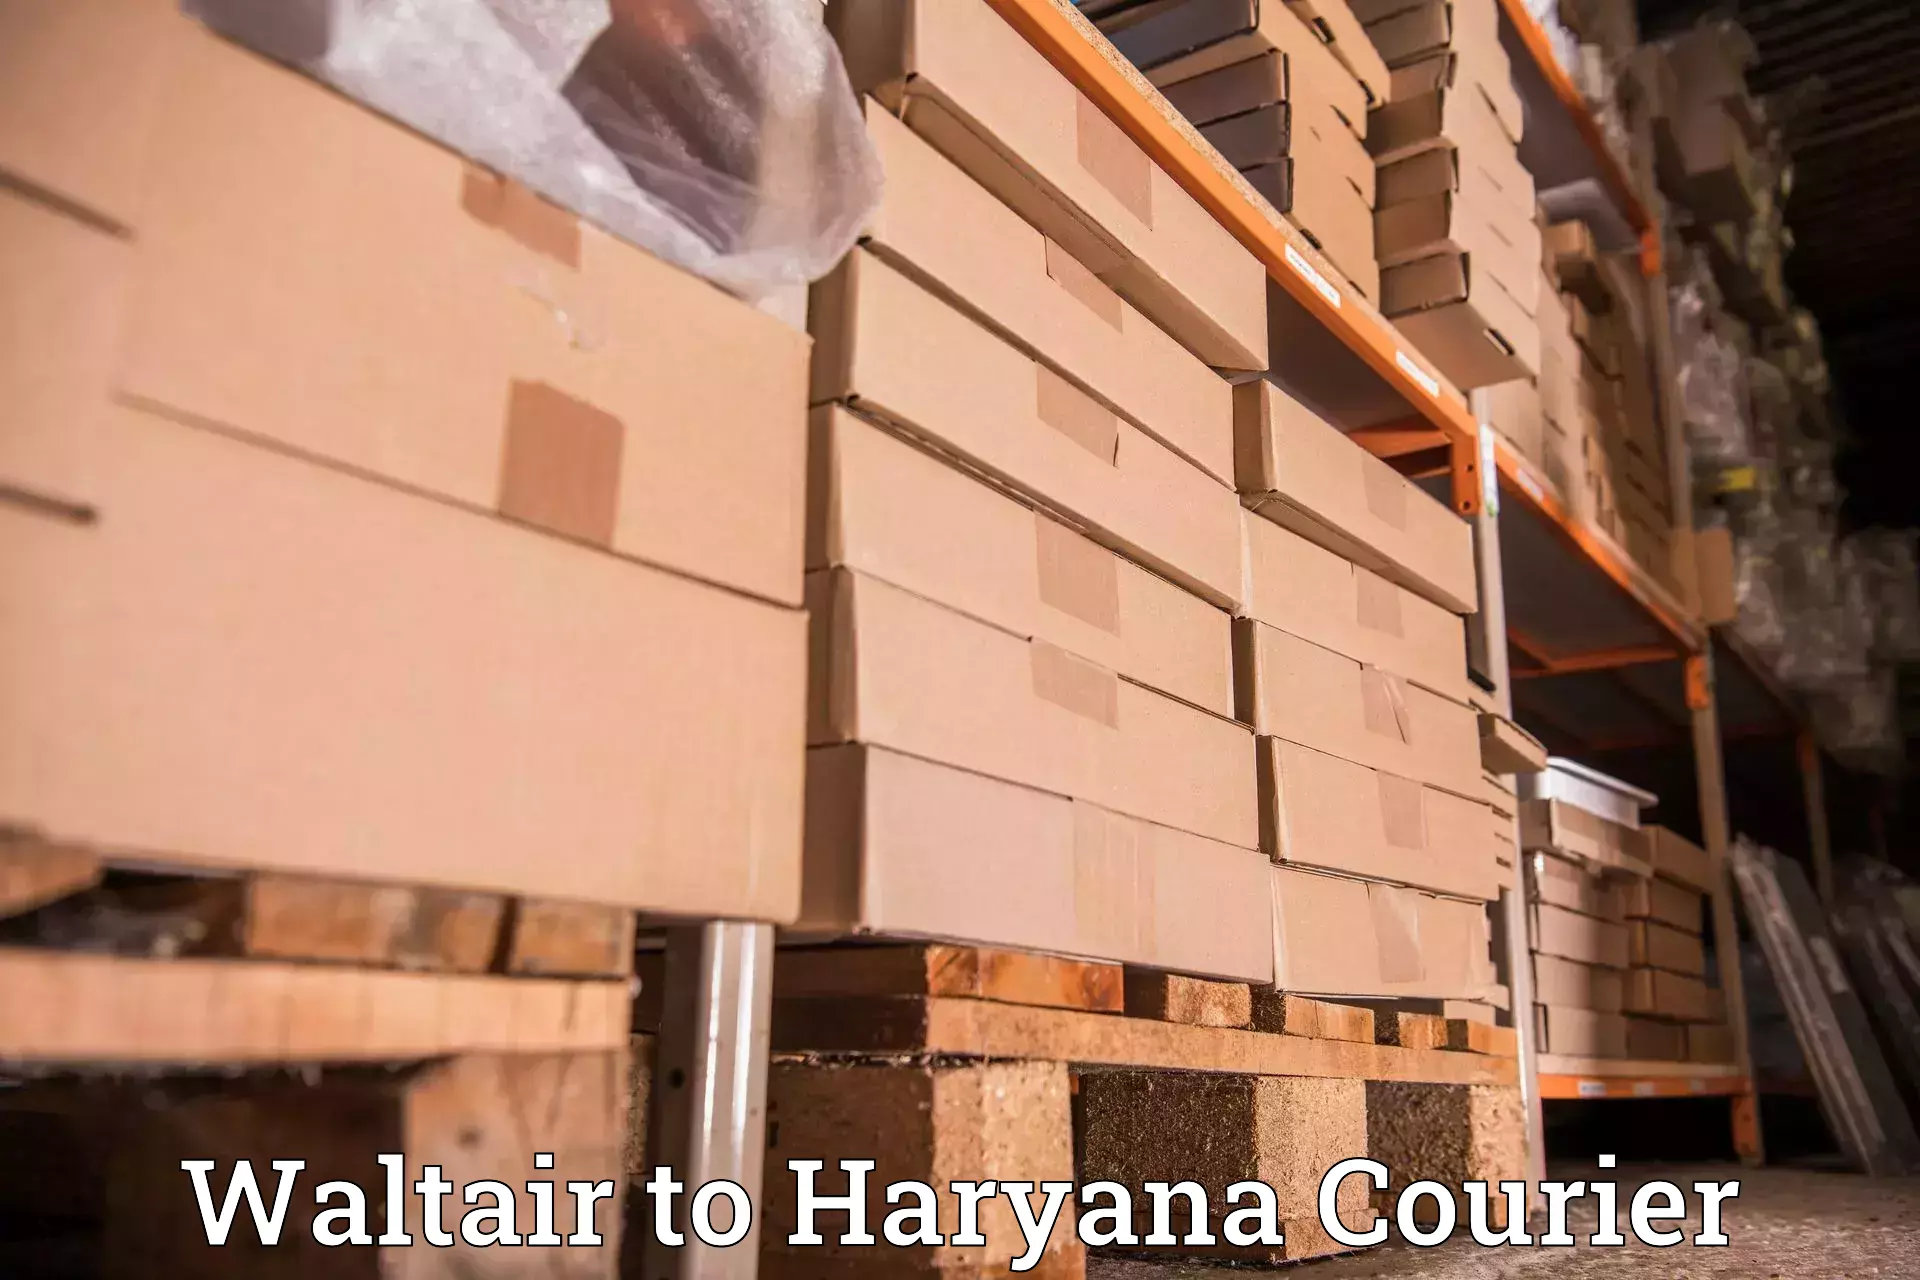 High-speed parcel service Waltair to Haryana